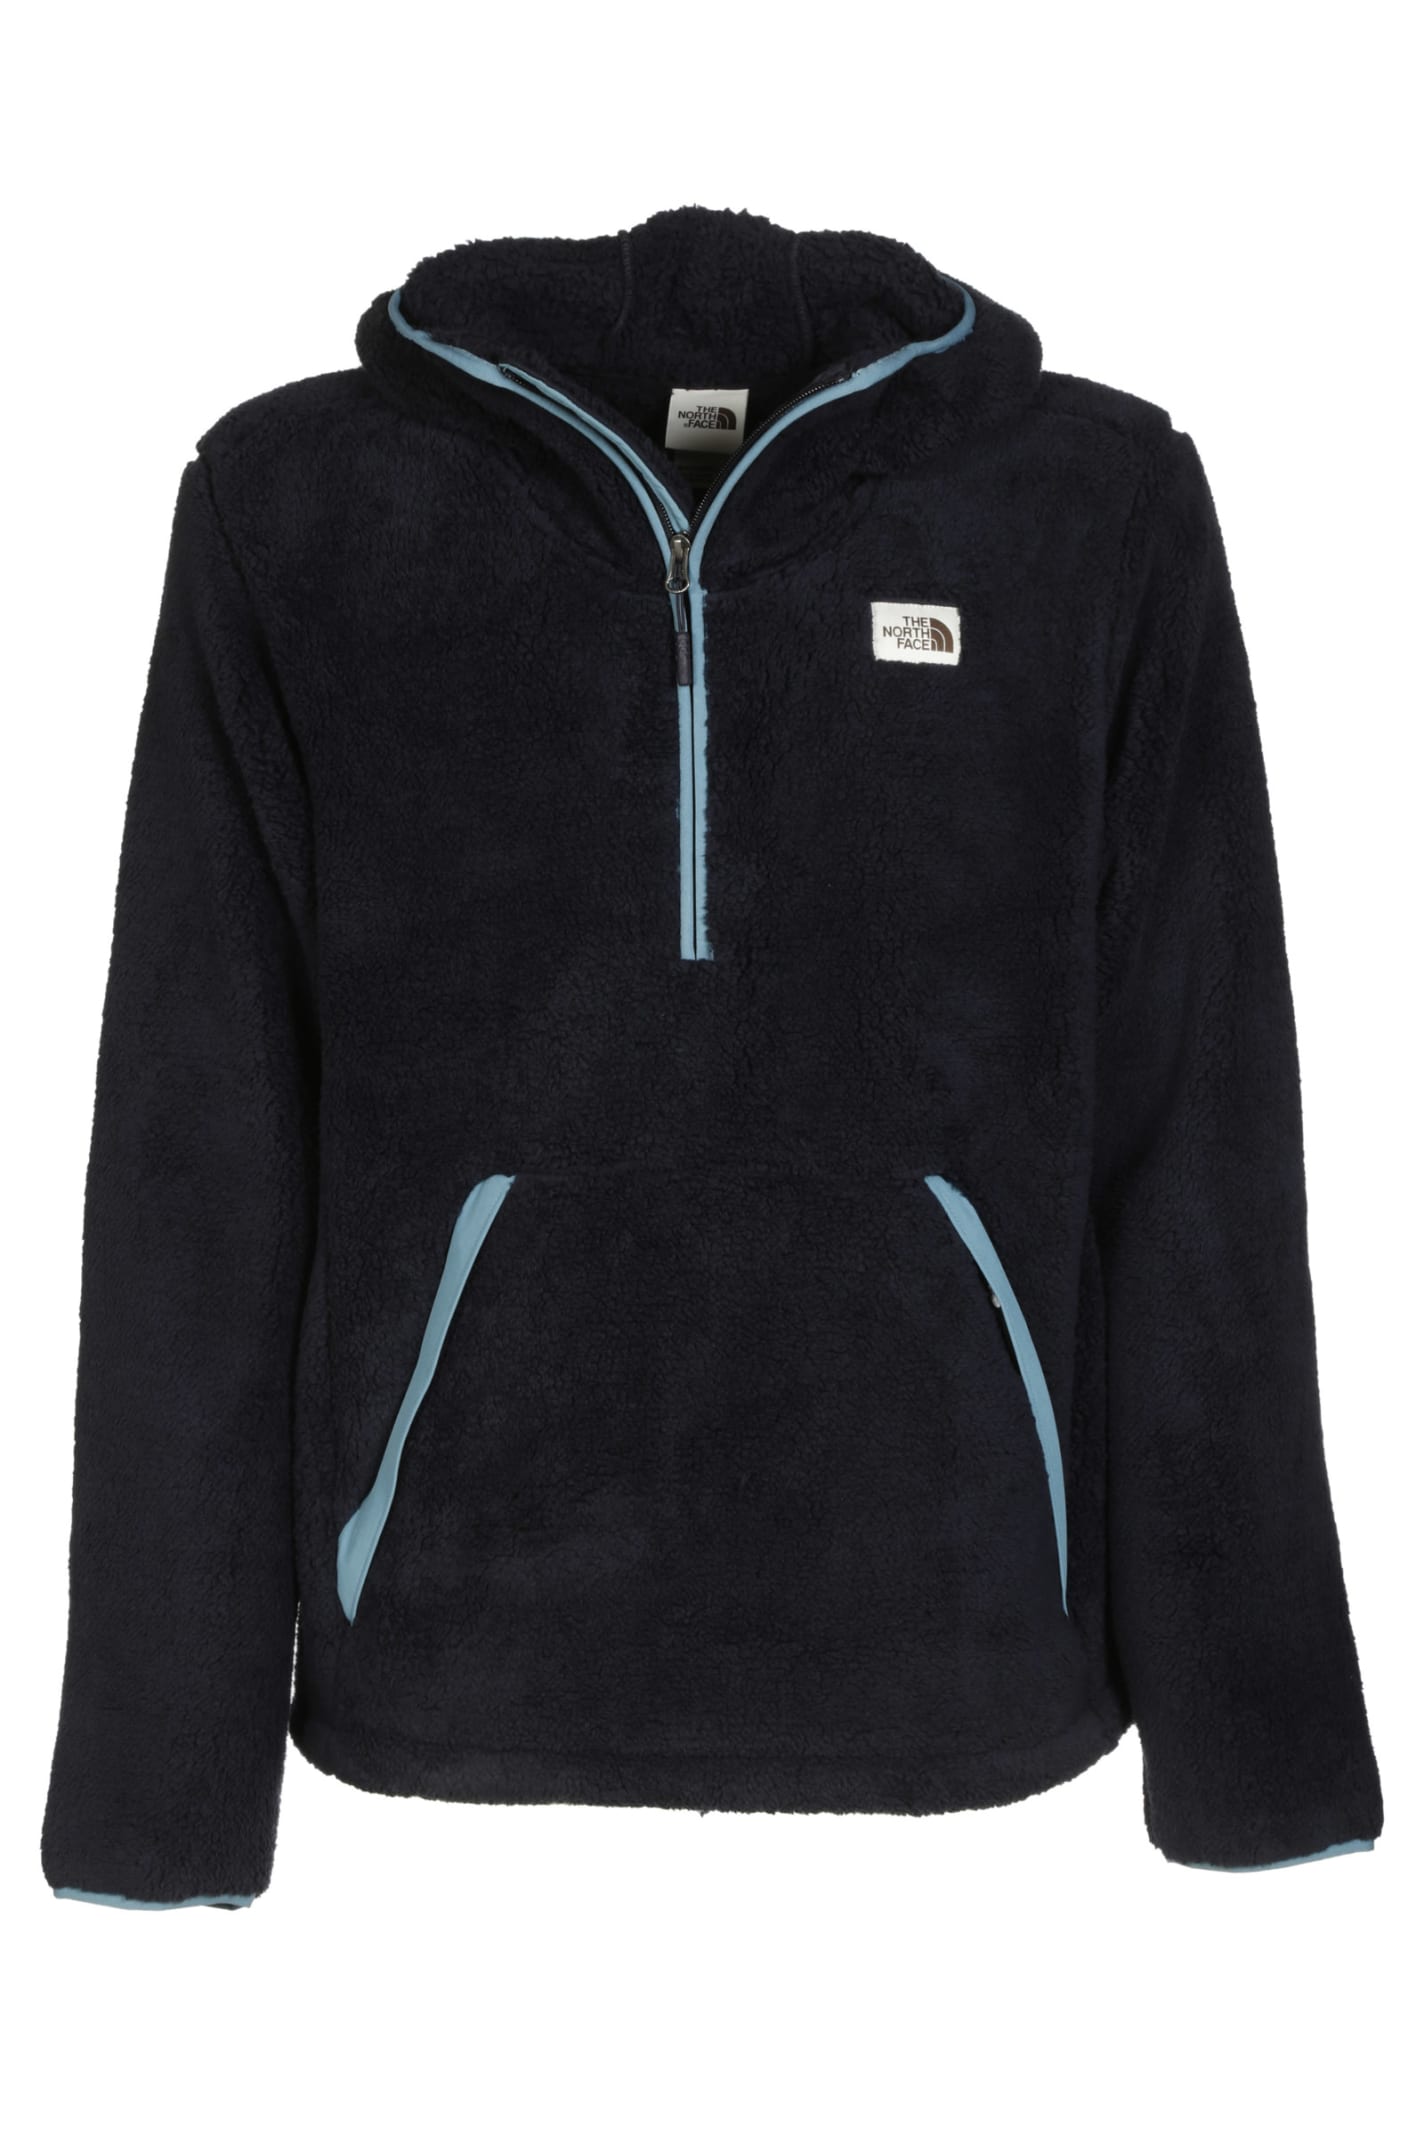 The North Face Campshire Hoodie